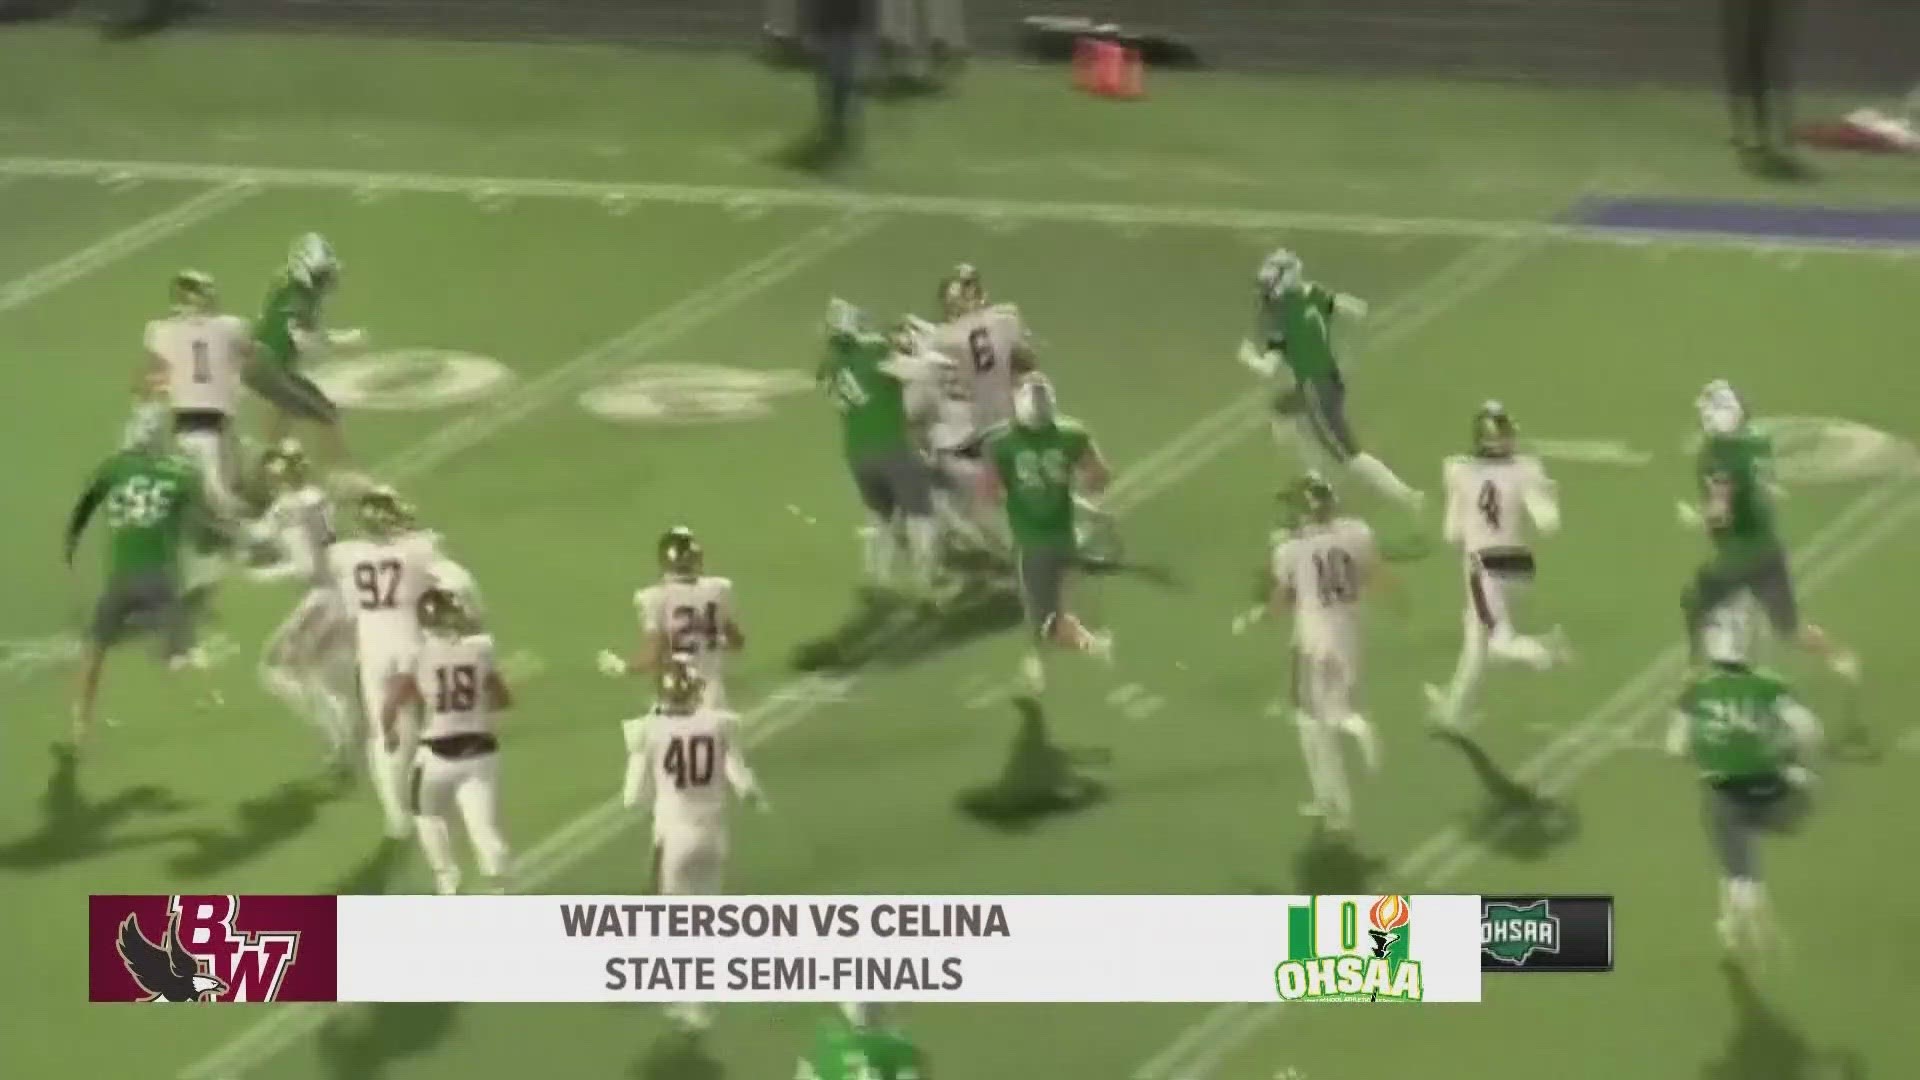 10TV's Adam King brings all the highlights from week 5 of the high school football playoffs.